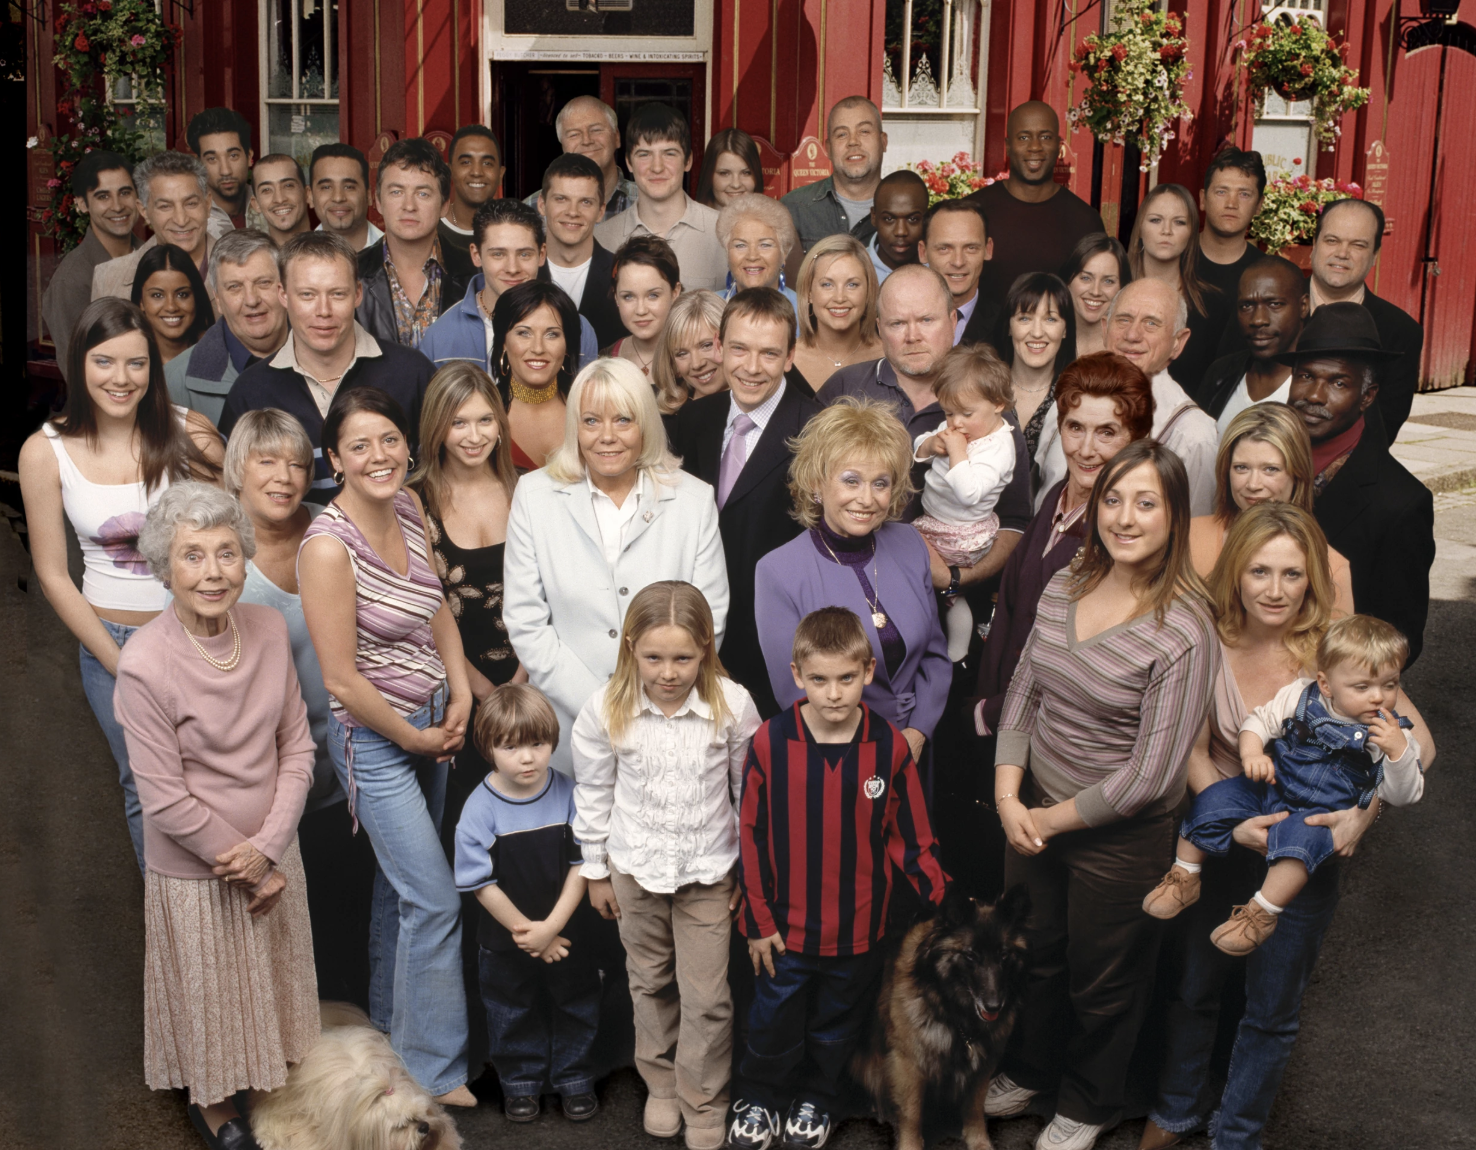 Eastenders Quiz: The full cast of Eastenders in a professional picture